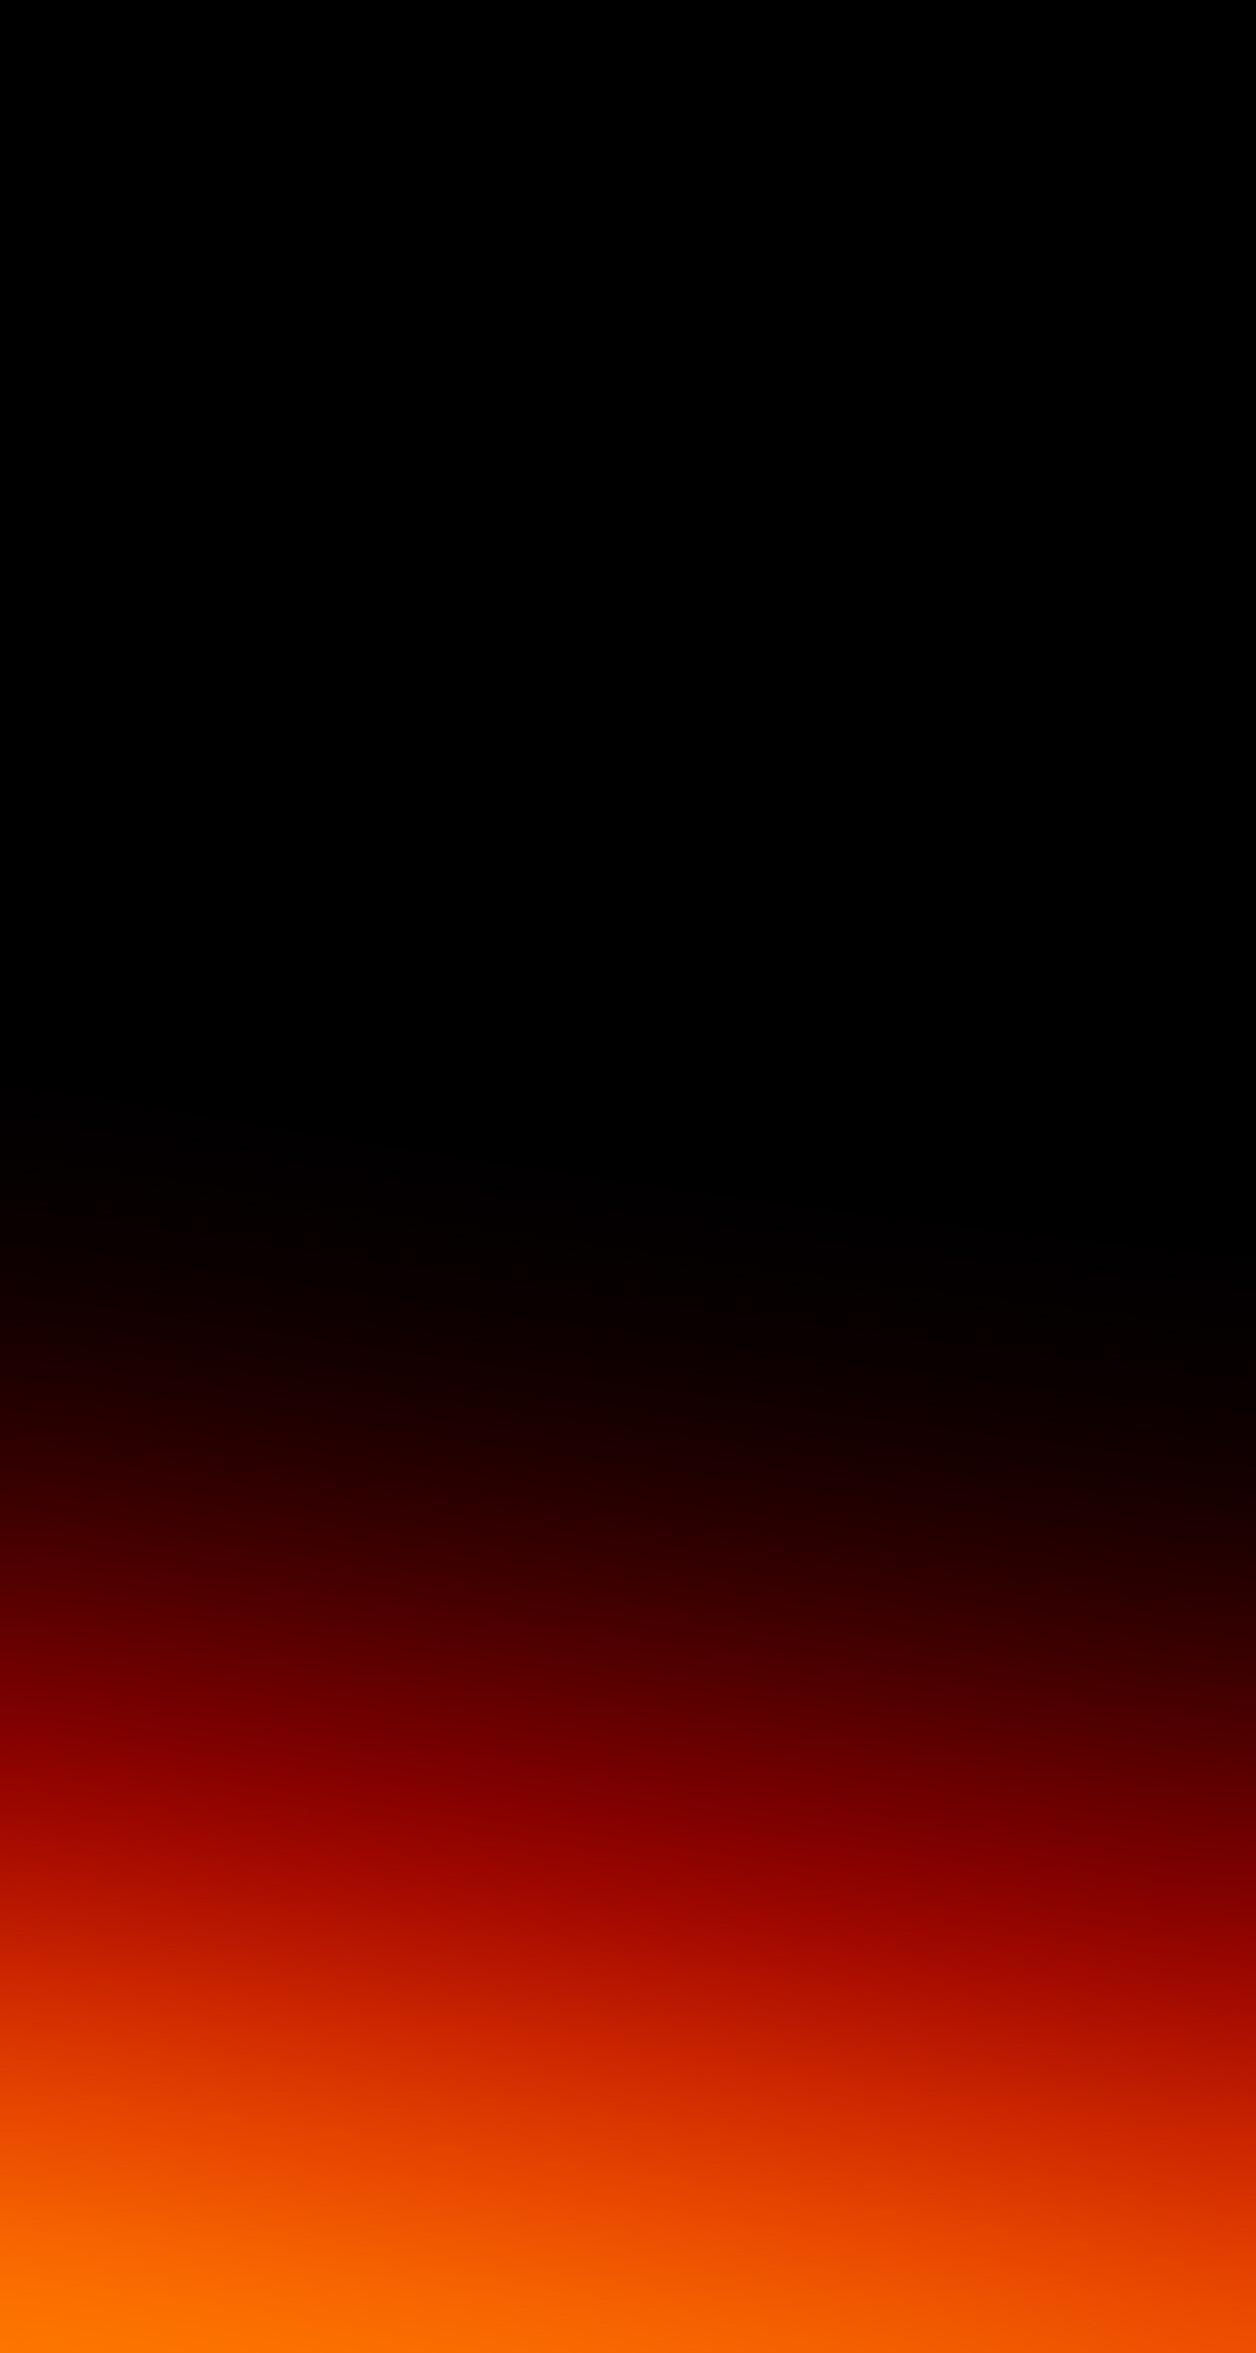 1256x2353, Someone Asked For This Same Wallpaper 7 - Gradients Wallpaper Iphone Red - HD Wallpaper 